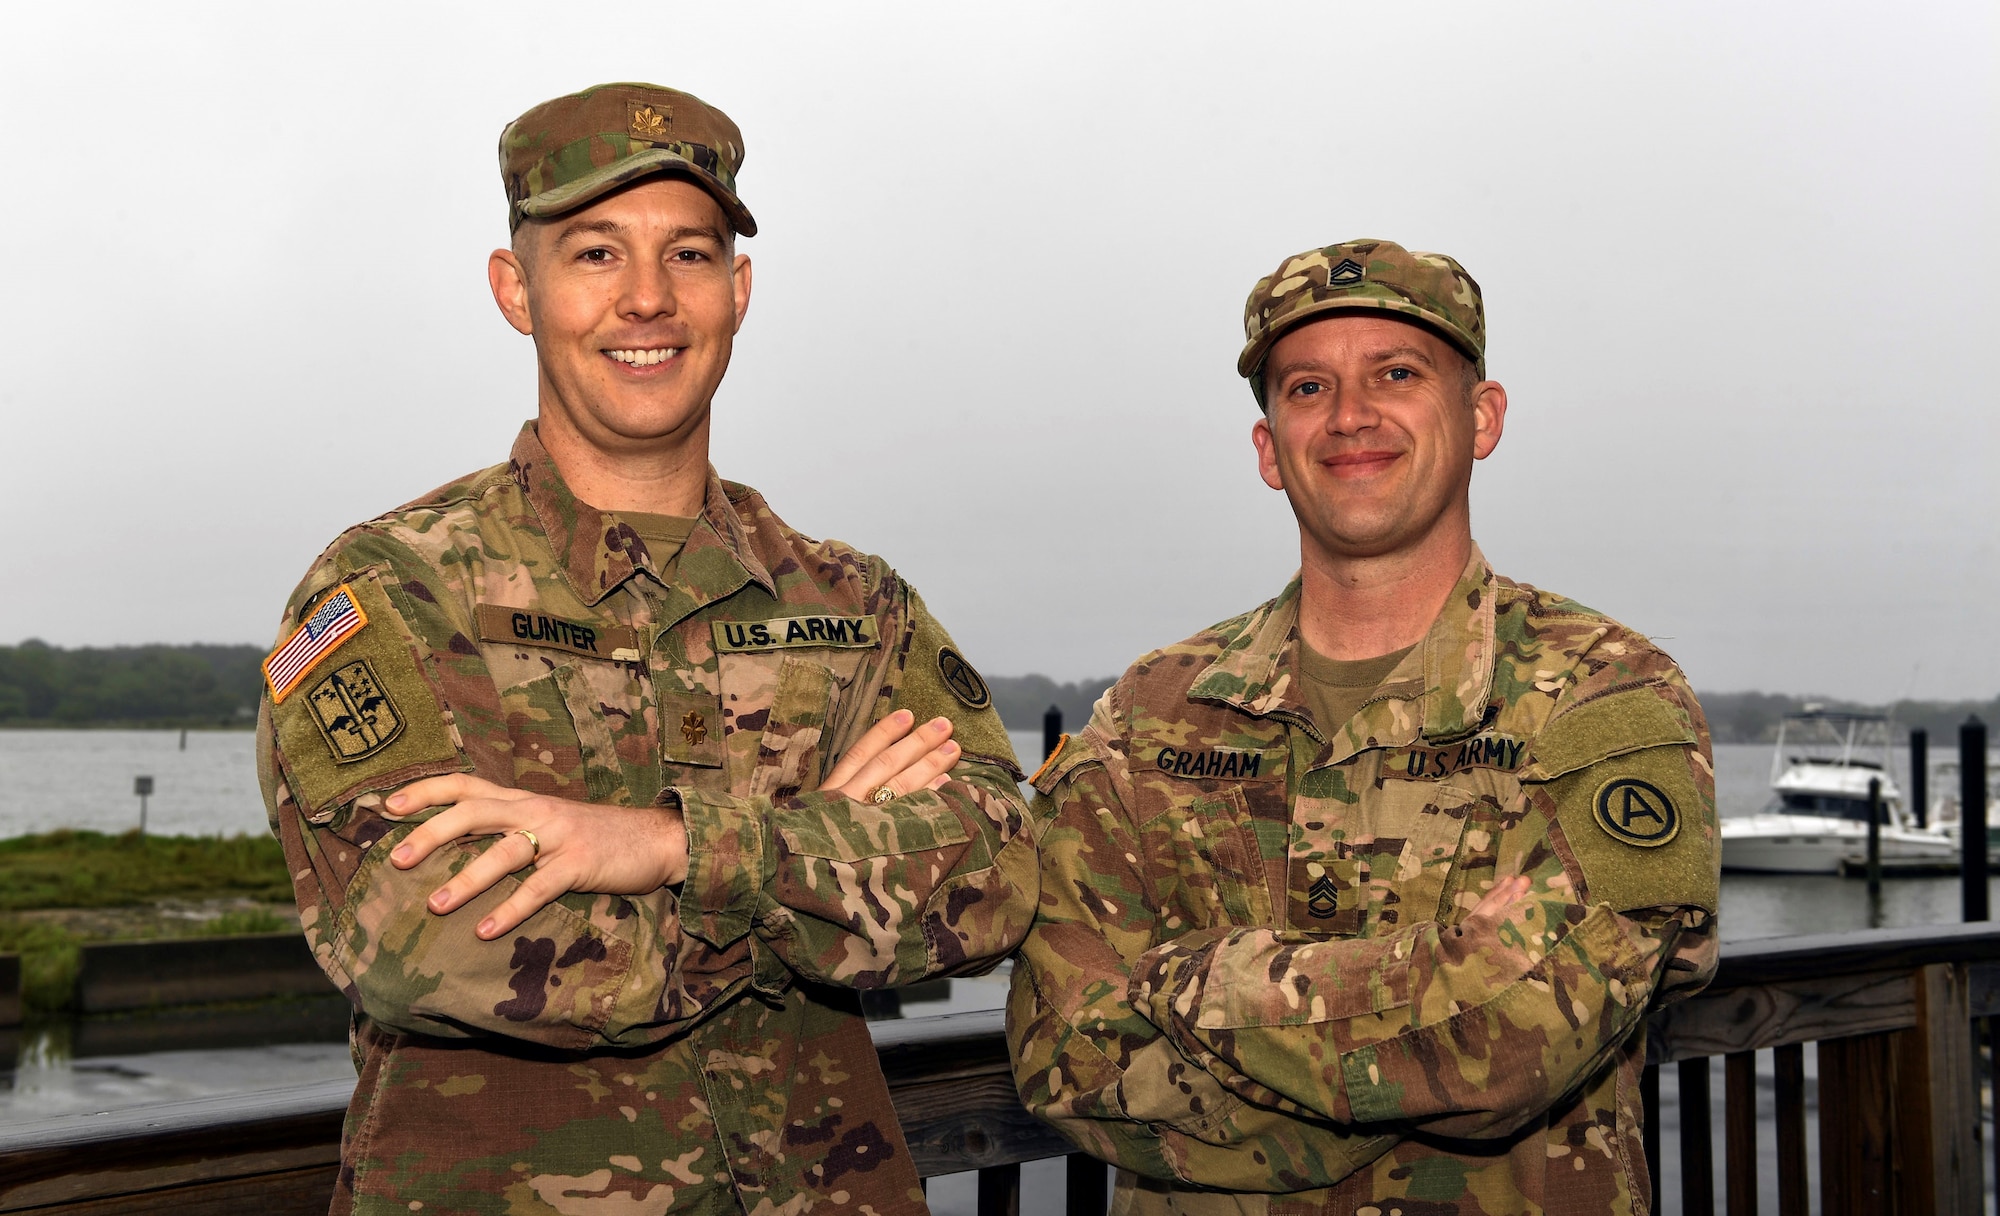 U.S. Army Maj. Nathan Gunter, left, and U.S. Army Sgt. 1st Class Jeremy Graham, both 497th Operations Support Squadron ground liaison officers, stand together for a photo May 13, 2019 at Joint Base Langley-Eustis, Virginia. In daily operations, U.S. Army ground liaison officers assist U.S. Air Force intelligence Airmen by translating Army operational and tactical terminology and graphics in operations orders to verbiage that Airmen can understand. Ultimately, the U.S. Army’s ground liaison mission creates a strategic enabler for senior leaders in multiple services. They serve as the air component’s touchpoint with the land component and help ensure a multi-domain perspective is applied when planning and executing air operations. (U.S. Air Force photo by Tech. Sgt. Nick Wilson)